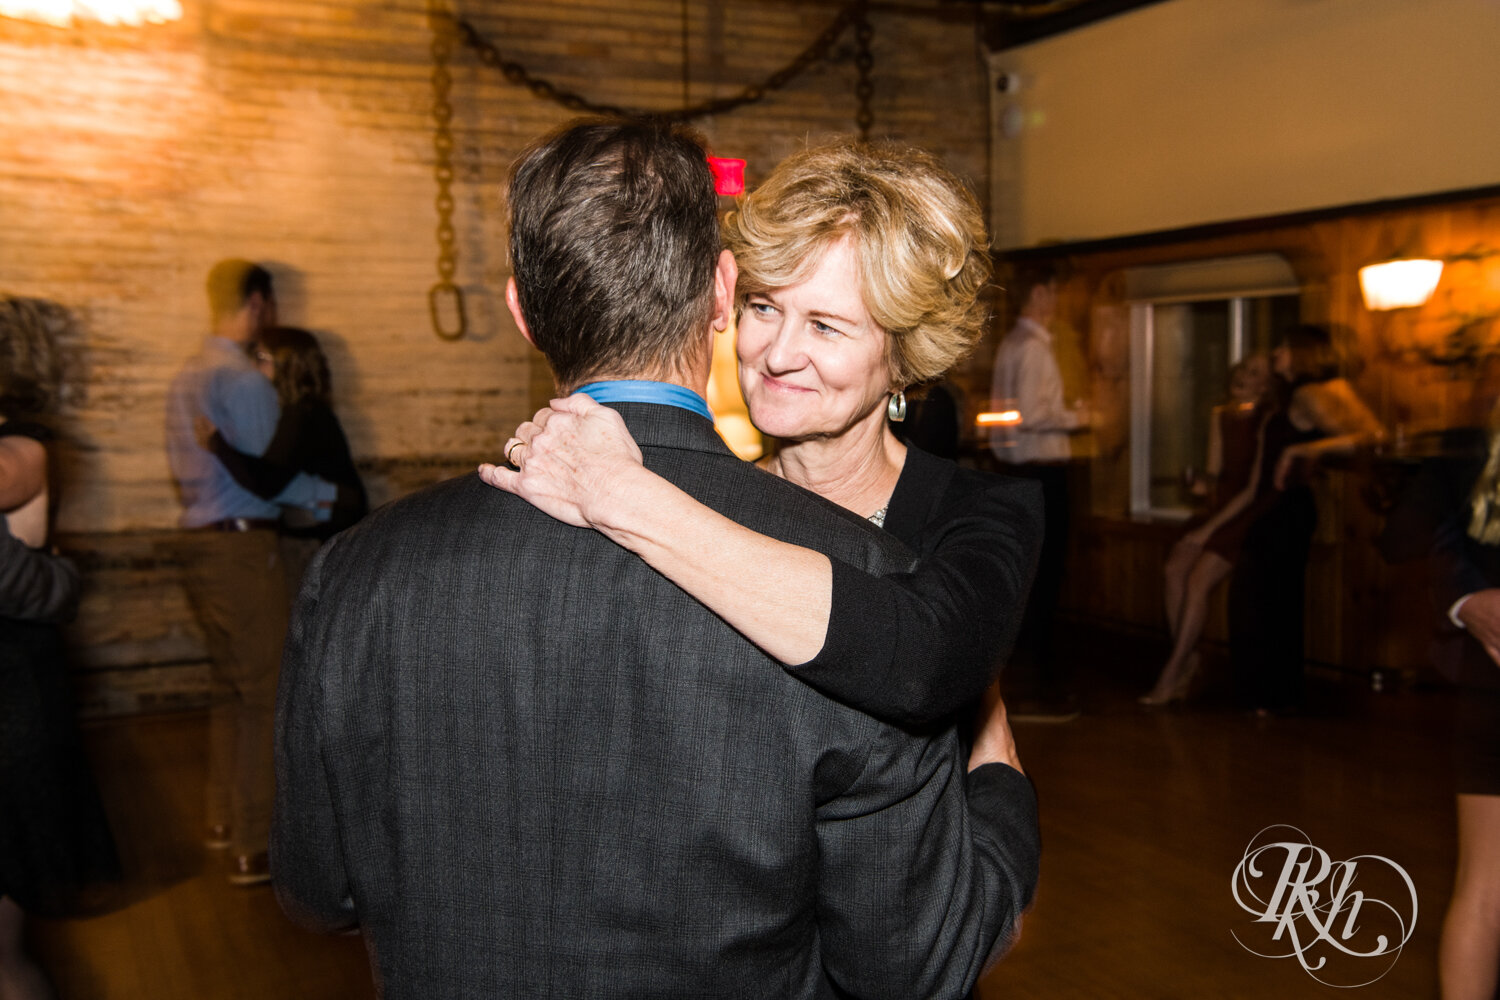 Bride and groom dance with guests at wedding reception at Kellerman's Event Center in White Bear Lake, Minnesota.